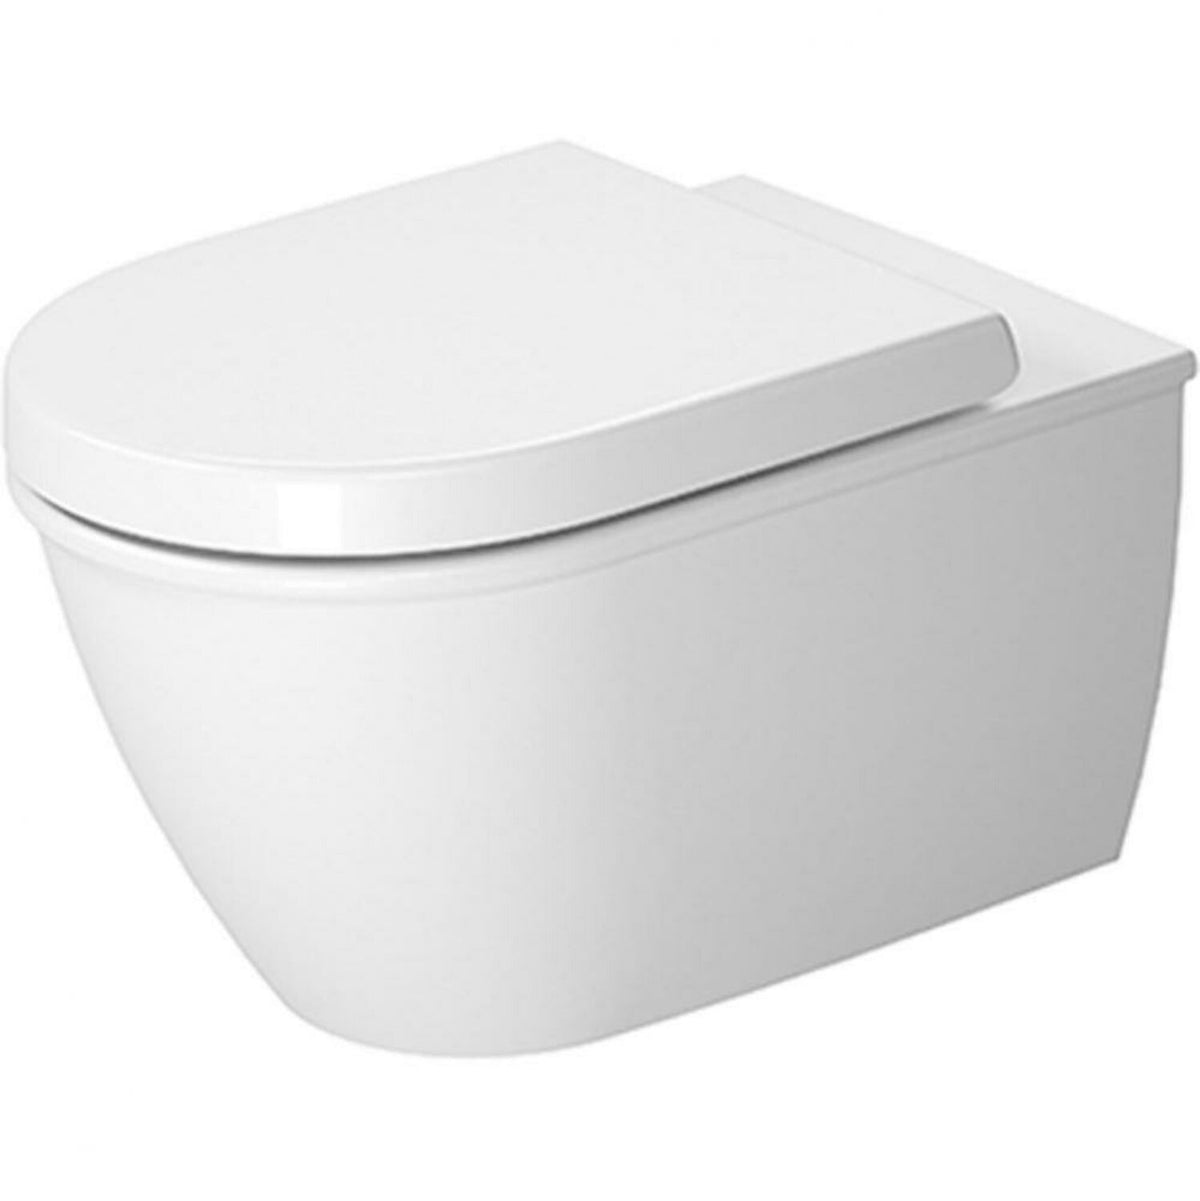 DARLING NEW WALL MOUNTED TOILET BOWL ONLY